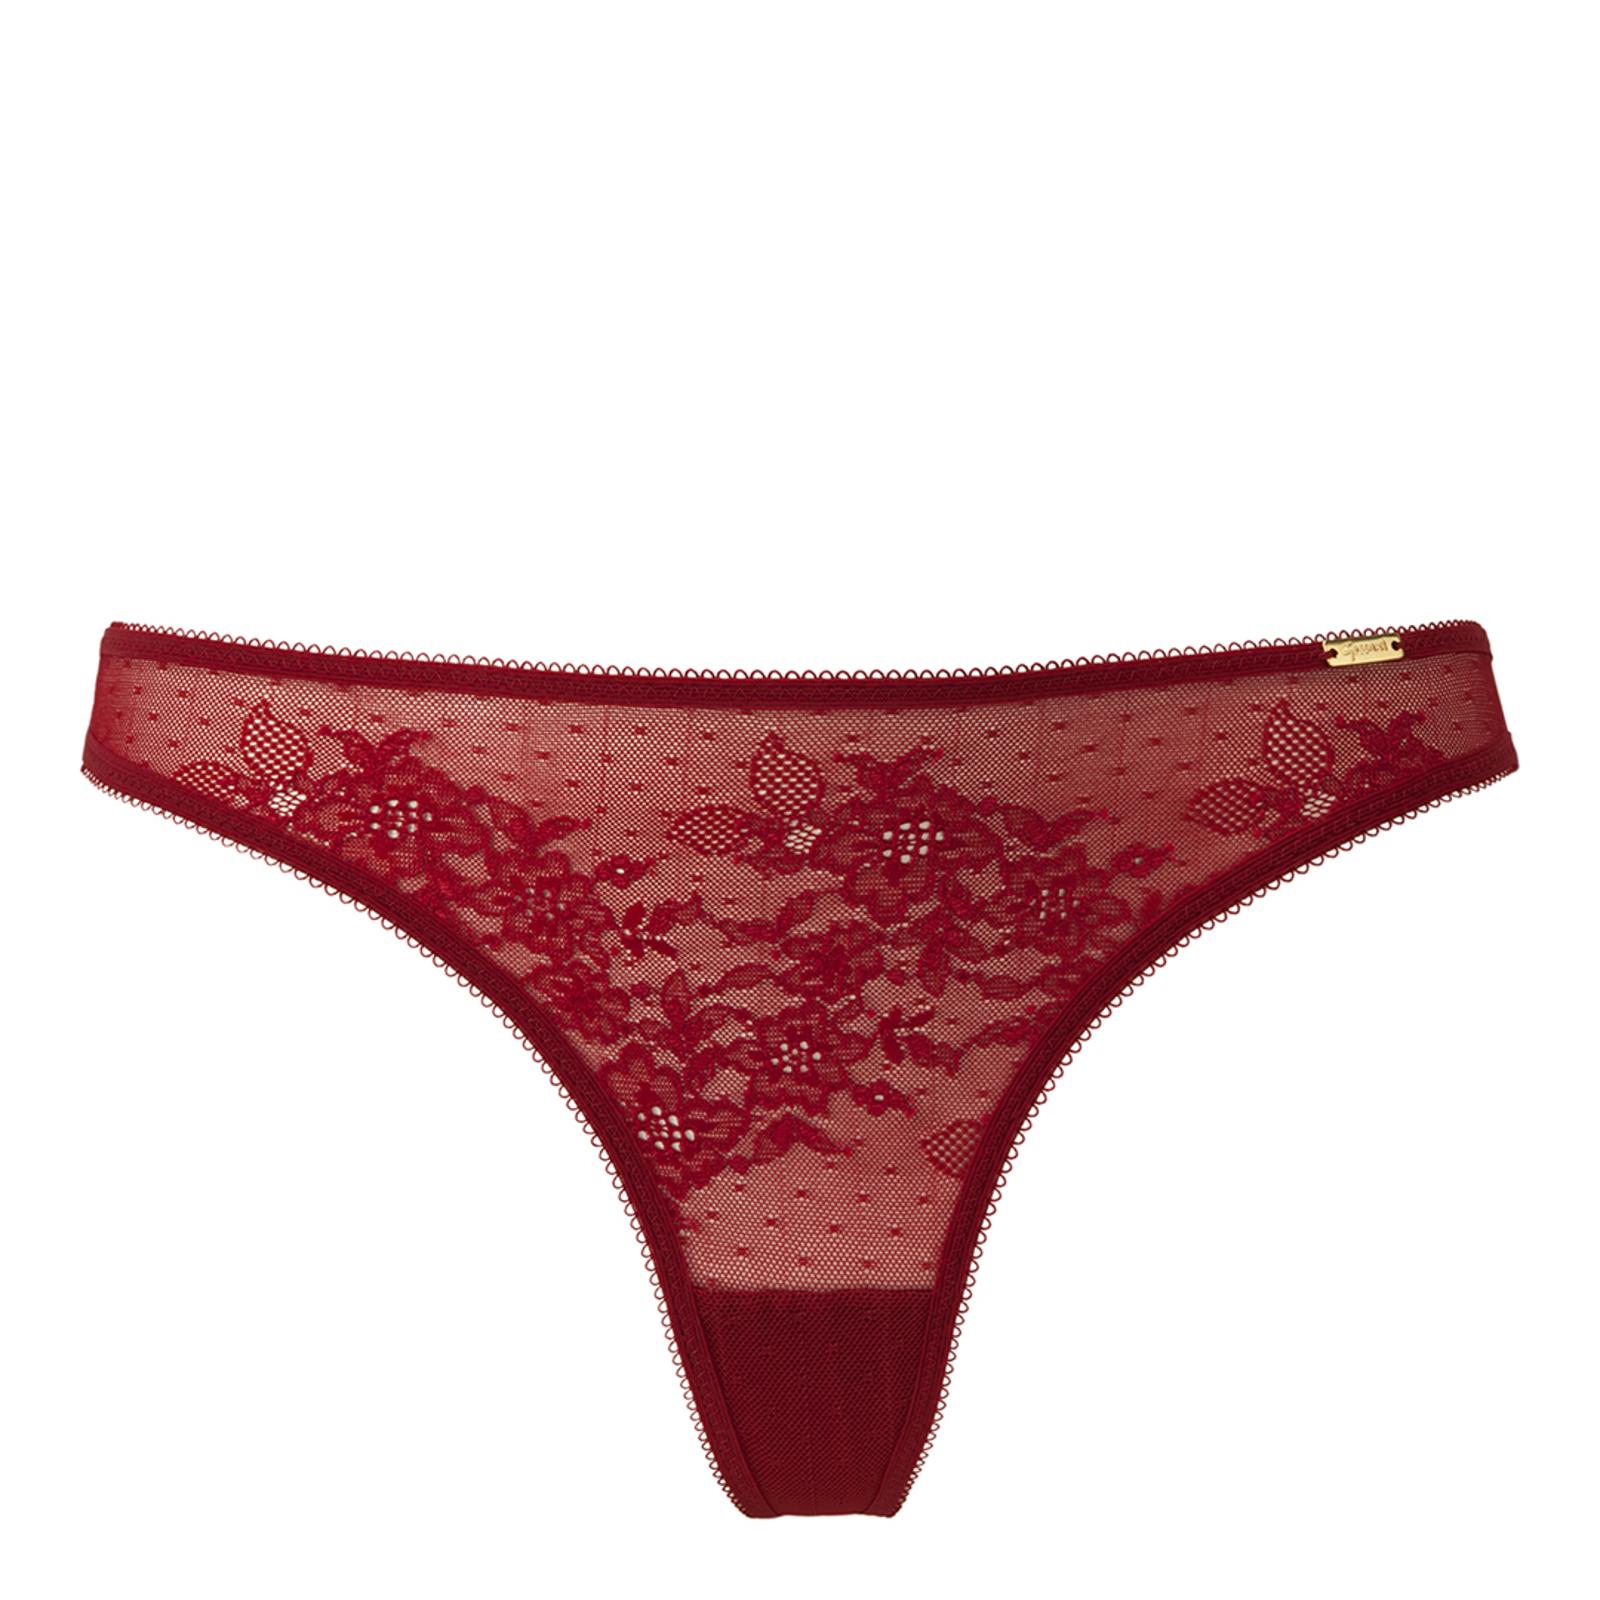 Bordeaux Glossies Lace Thong - BrandAlley